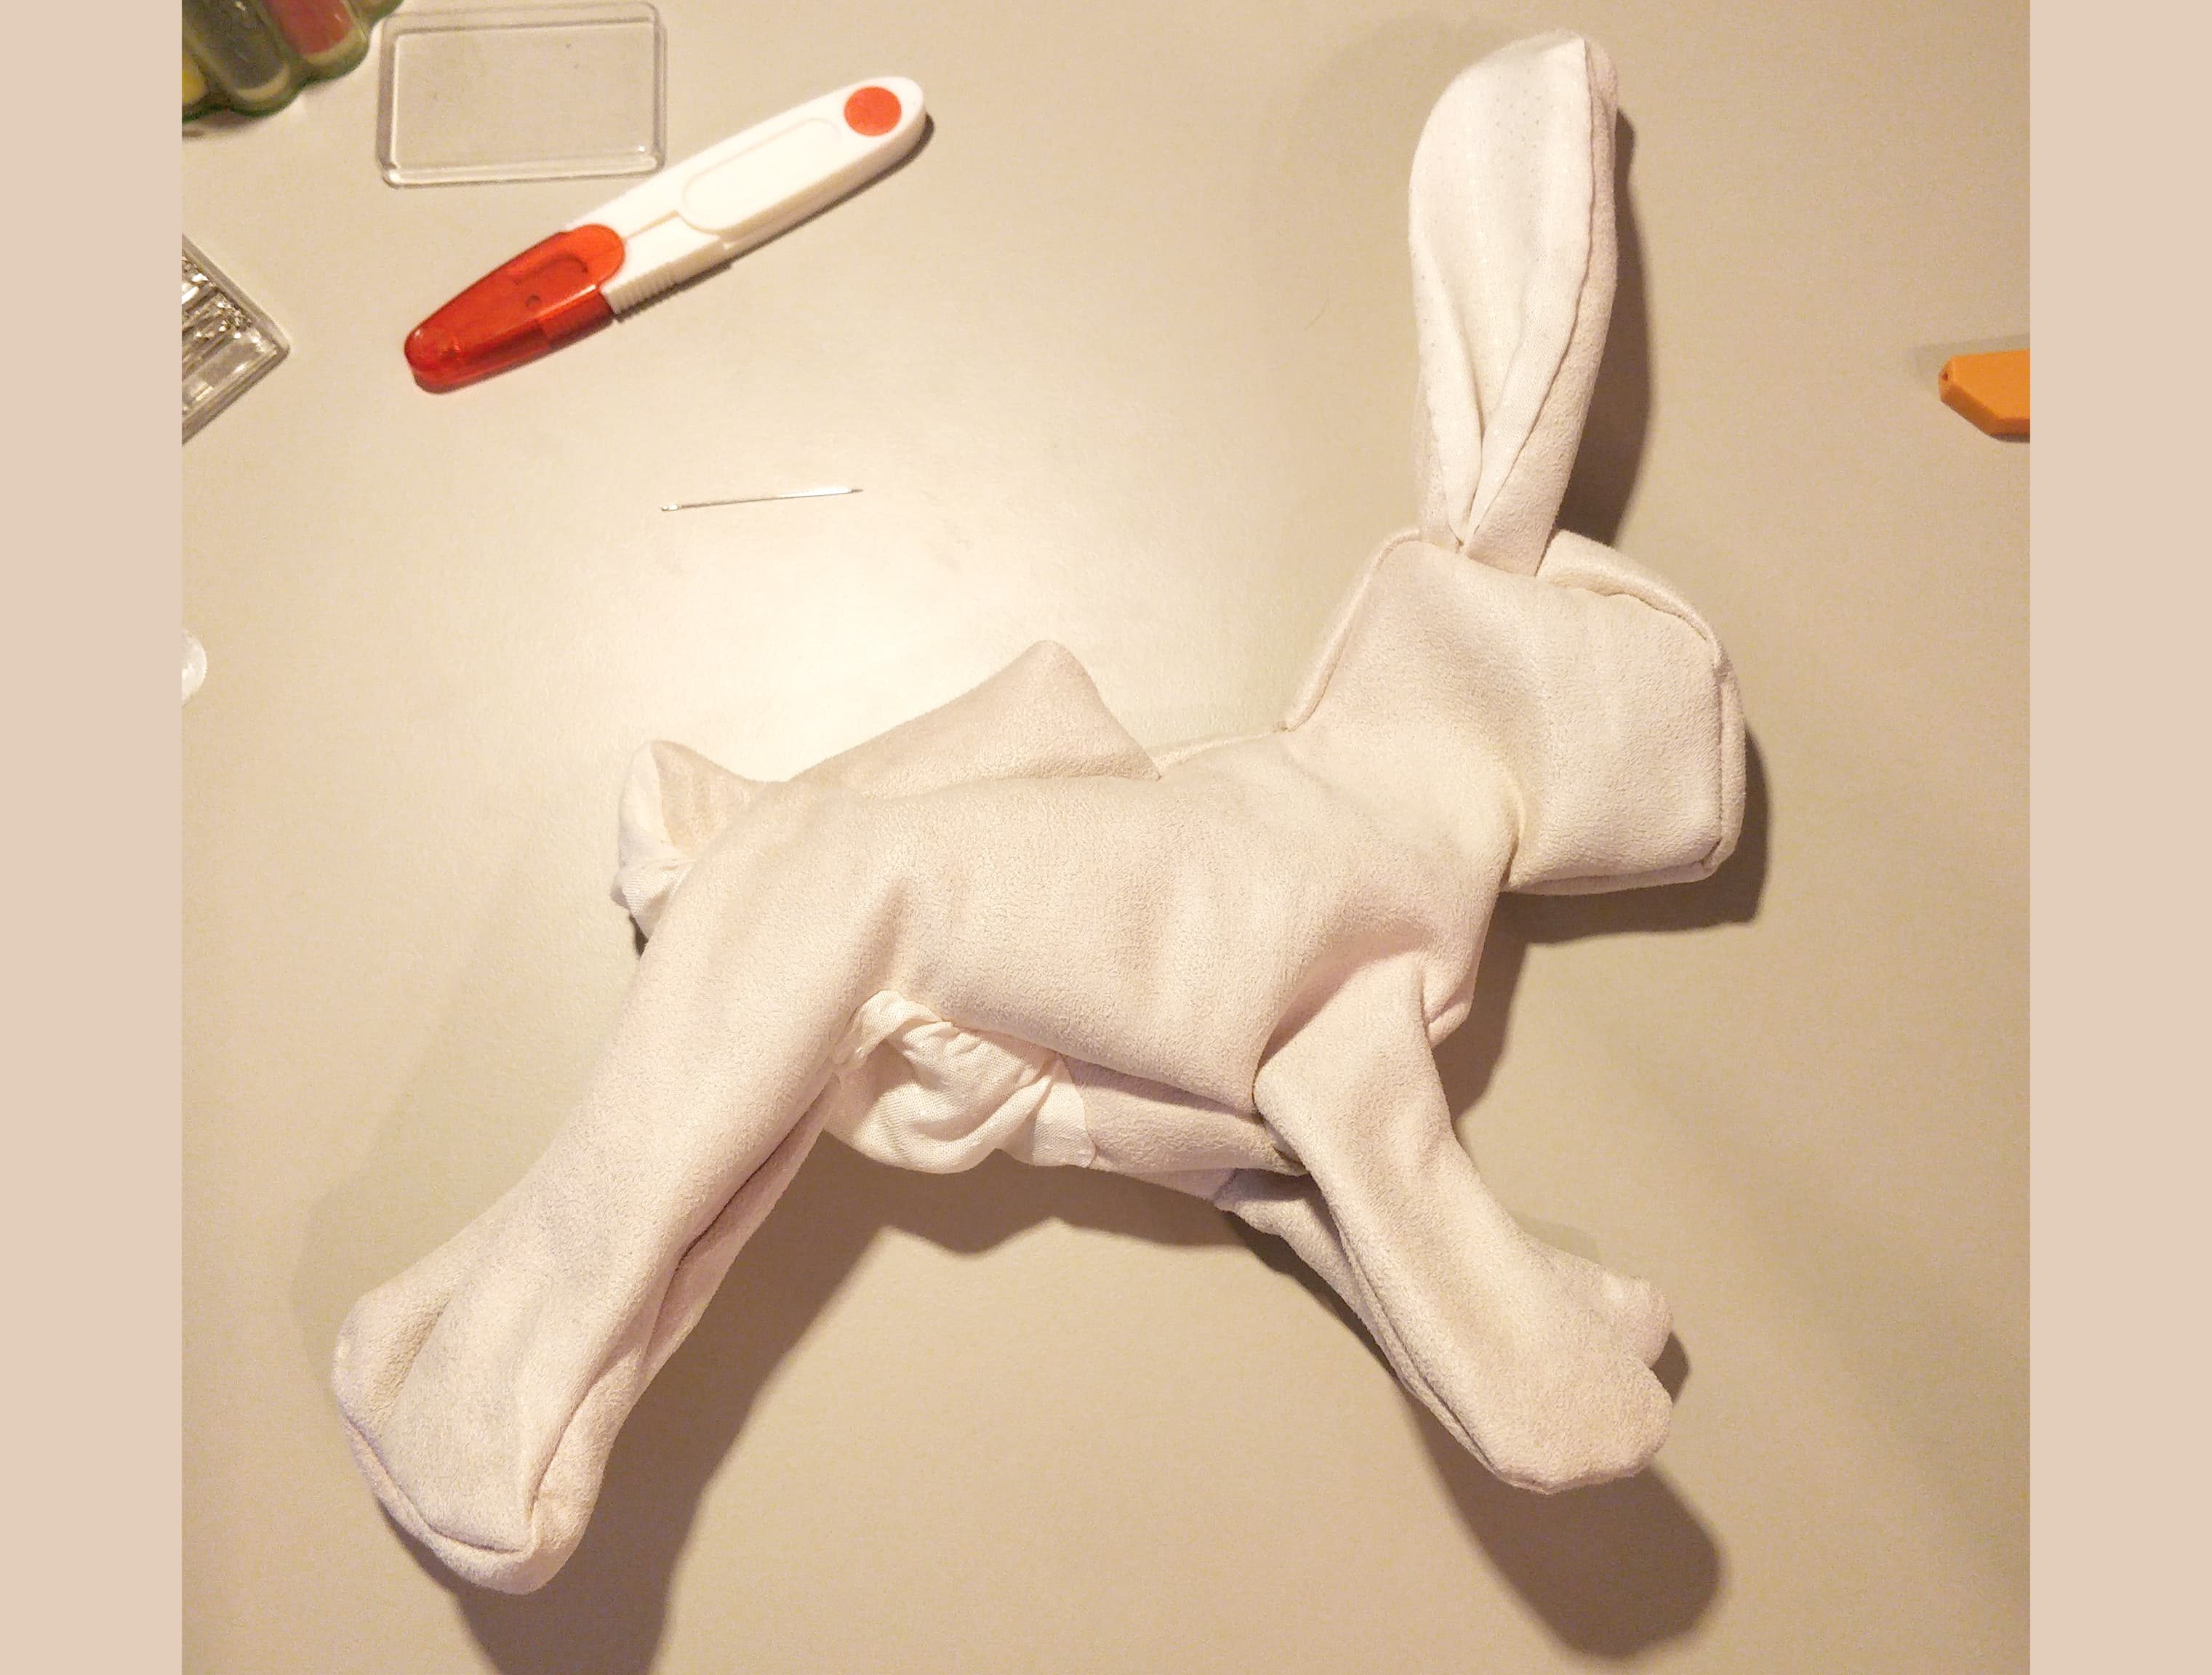 The unstuffed rabbit flipped and ready to be stuffed. There is a seam left unsewn on the back to fit the stuffing in.